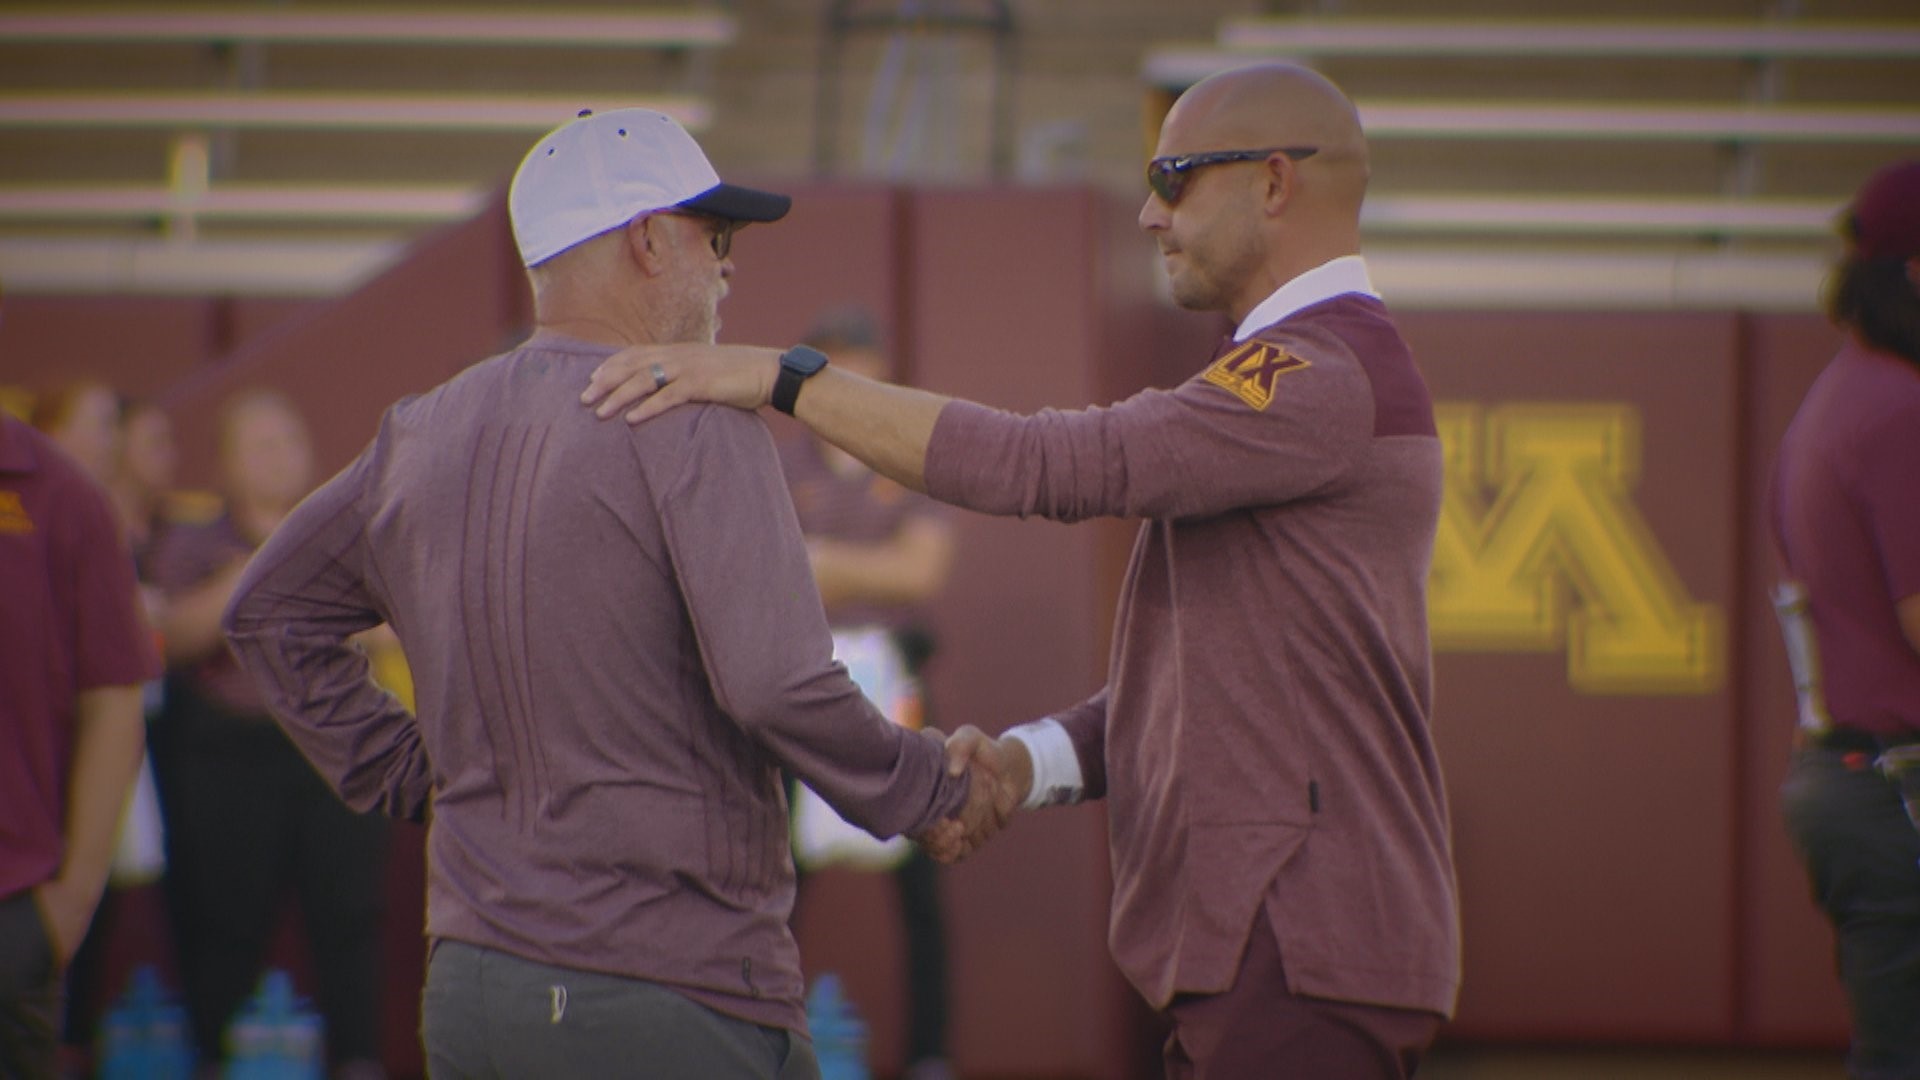 Former Minnesota head coach Jerry Kill, who had been critical of the program since leaving in 2015, shook hands with Coach P.J. Fleck without issue.